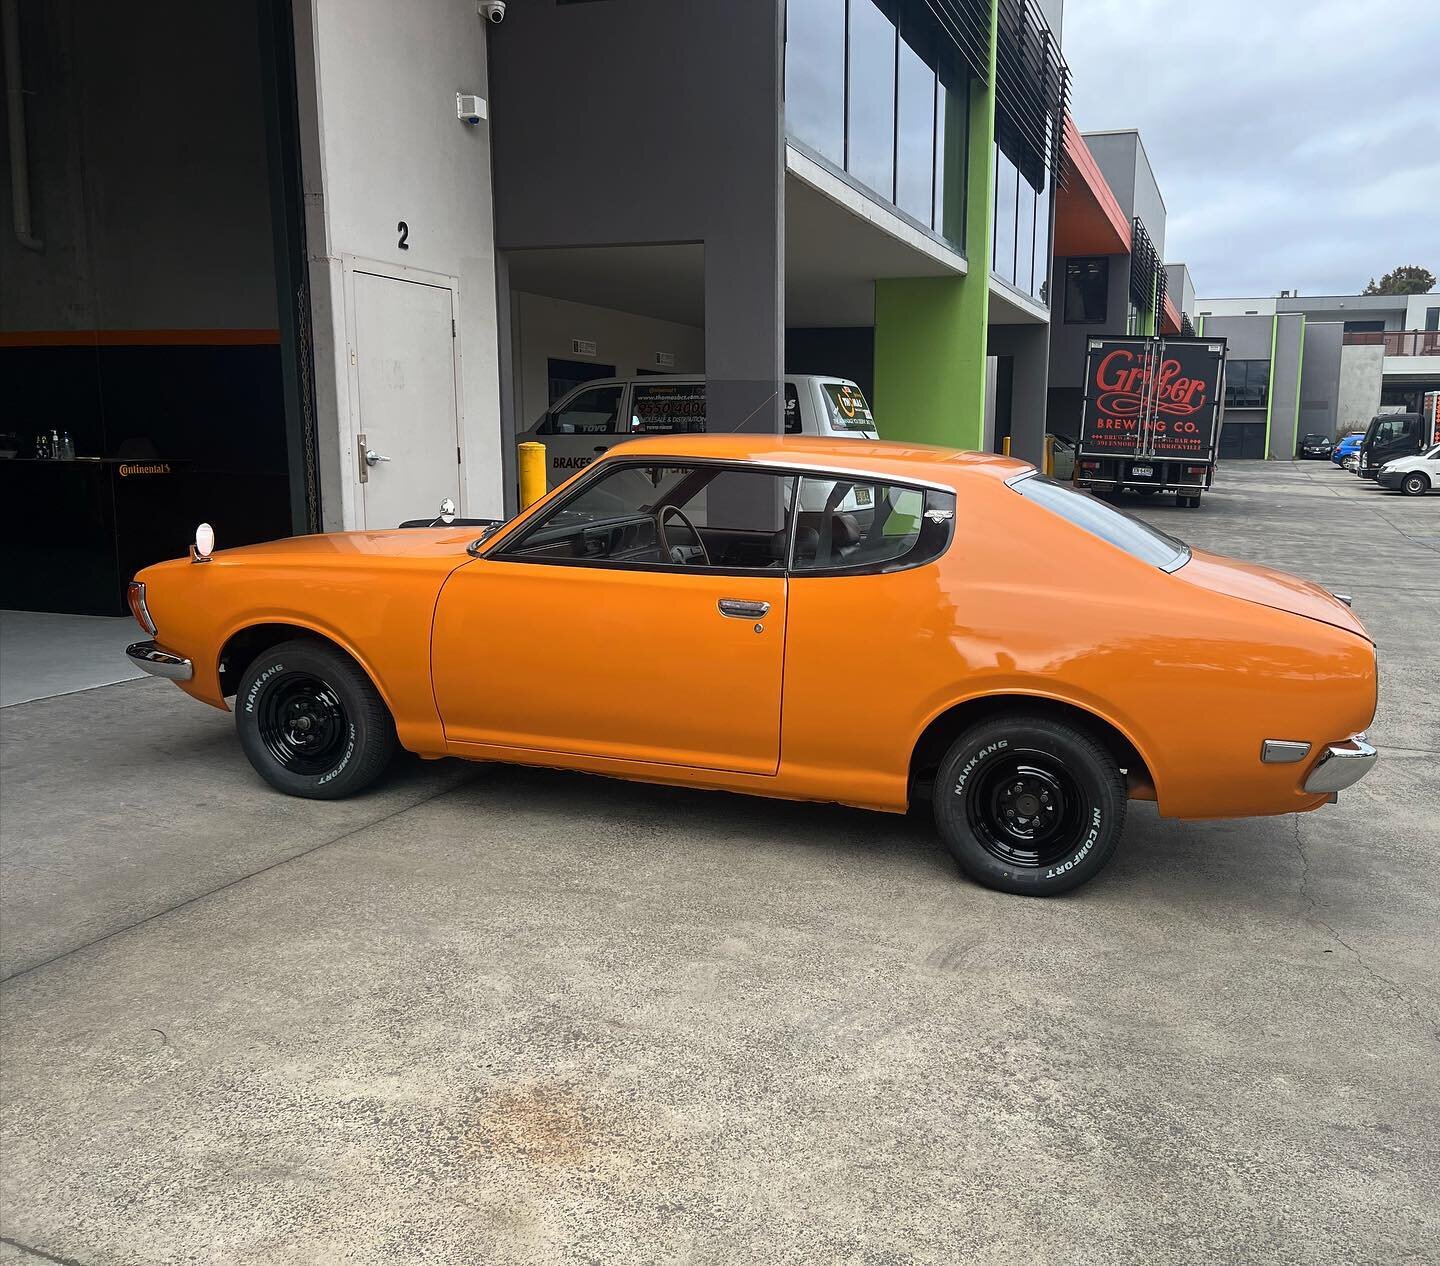 And just like that - the resident Datsun 180B SSS is back in the hands of its rightful owner. I wish I had some photos of when it came in, but I&rsquo;ll always remember it. Hours and hours of work and searching for the missing pieces, restorations a